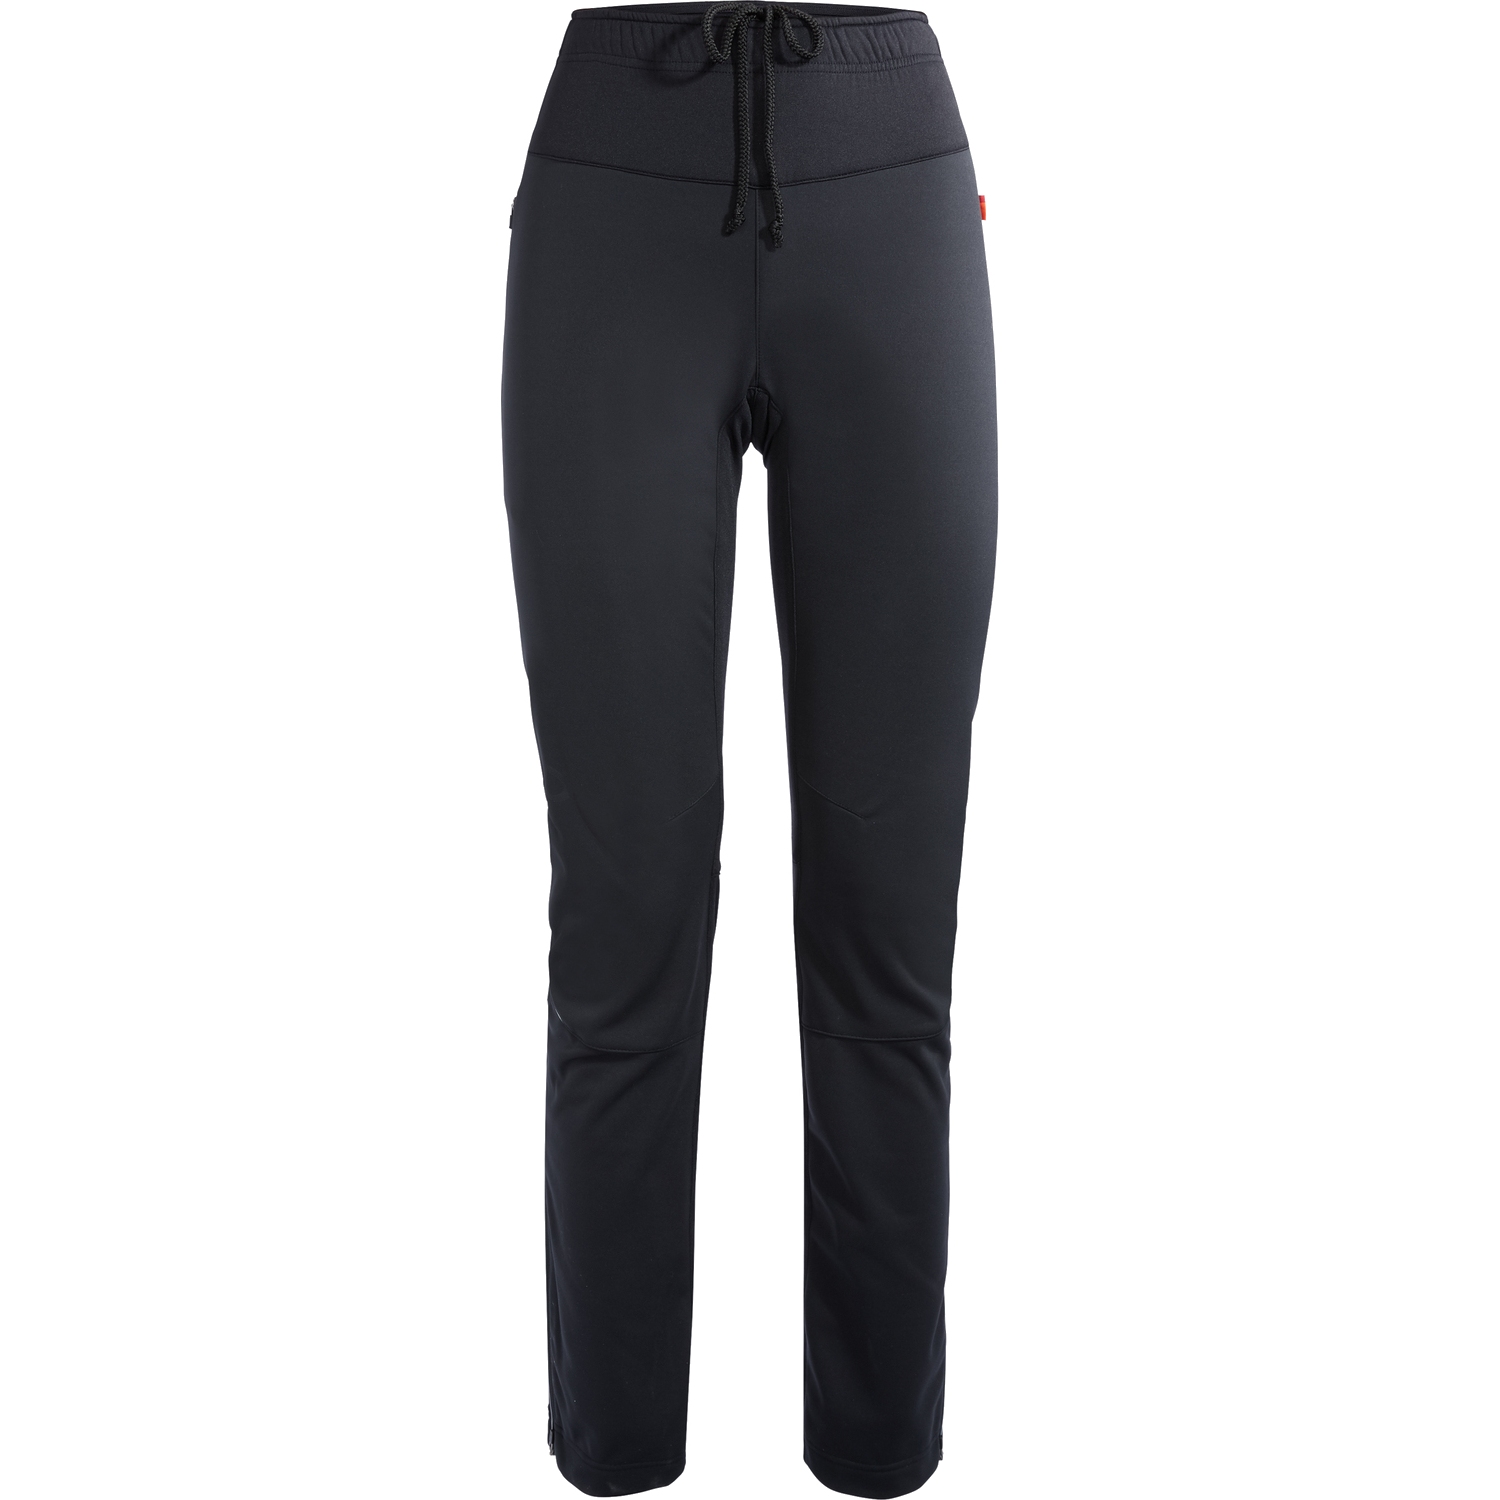 Picture of Vaude Wintry Pants V Women - black/white